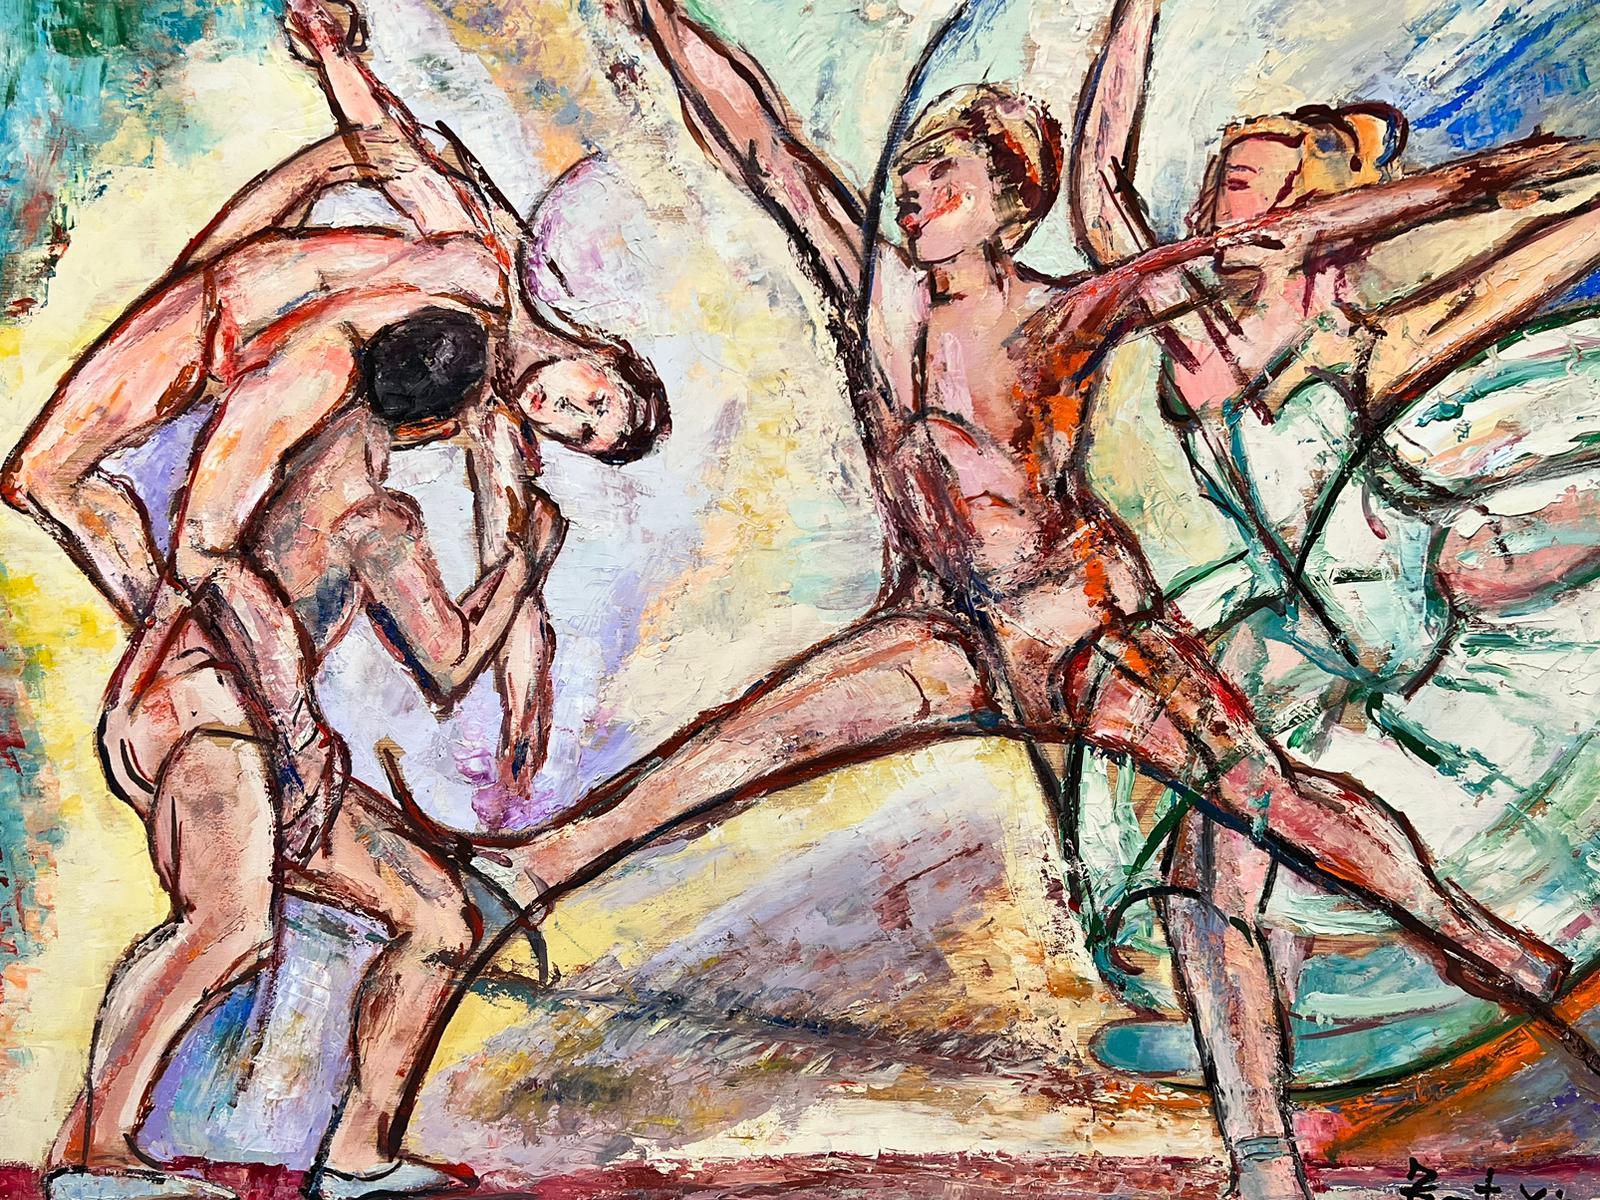 Maria Tort Xirau Still-Life Painting - Large Spanish Expressionist Oil Painting Dancing Male Ballerina's